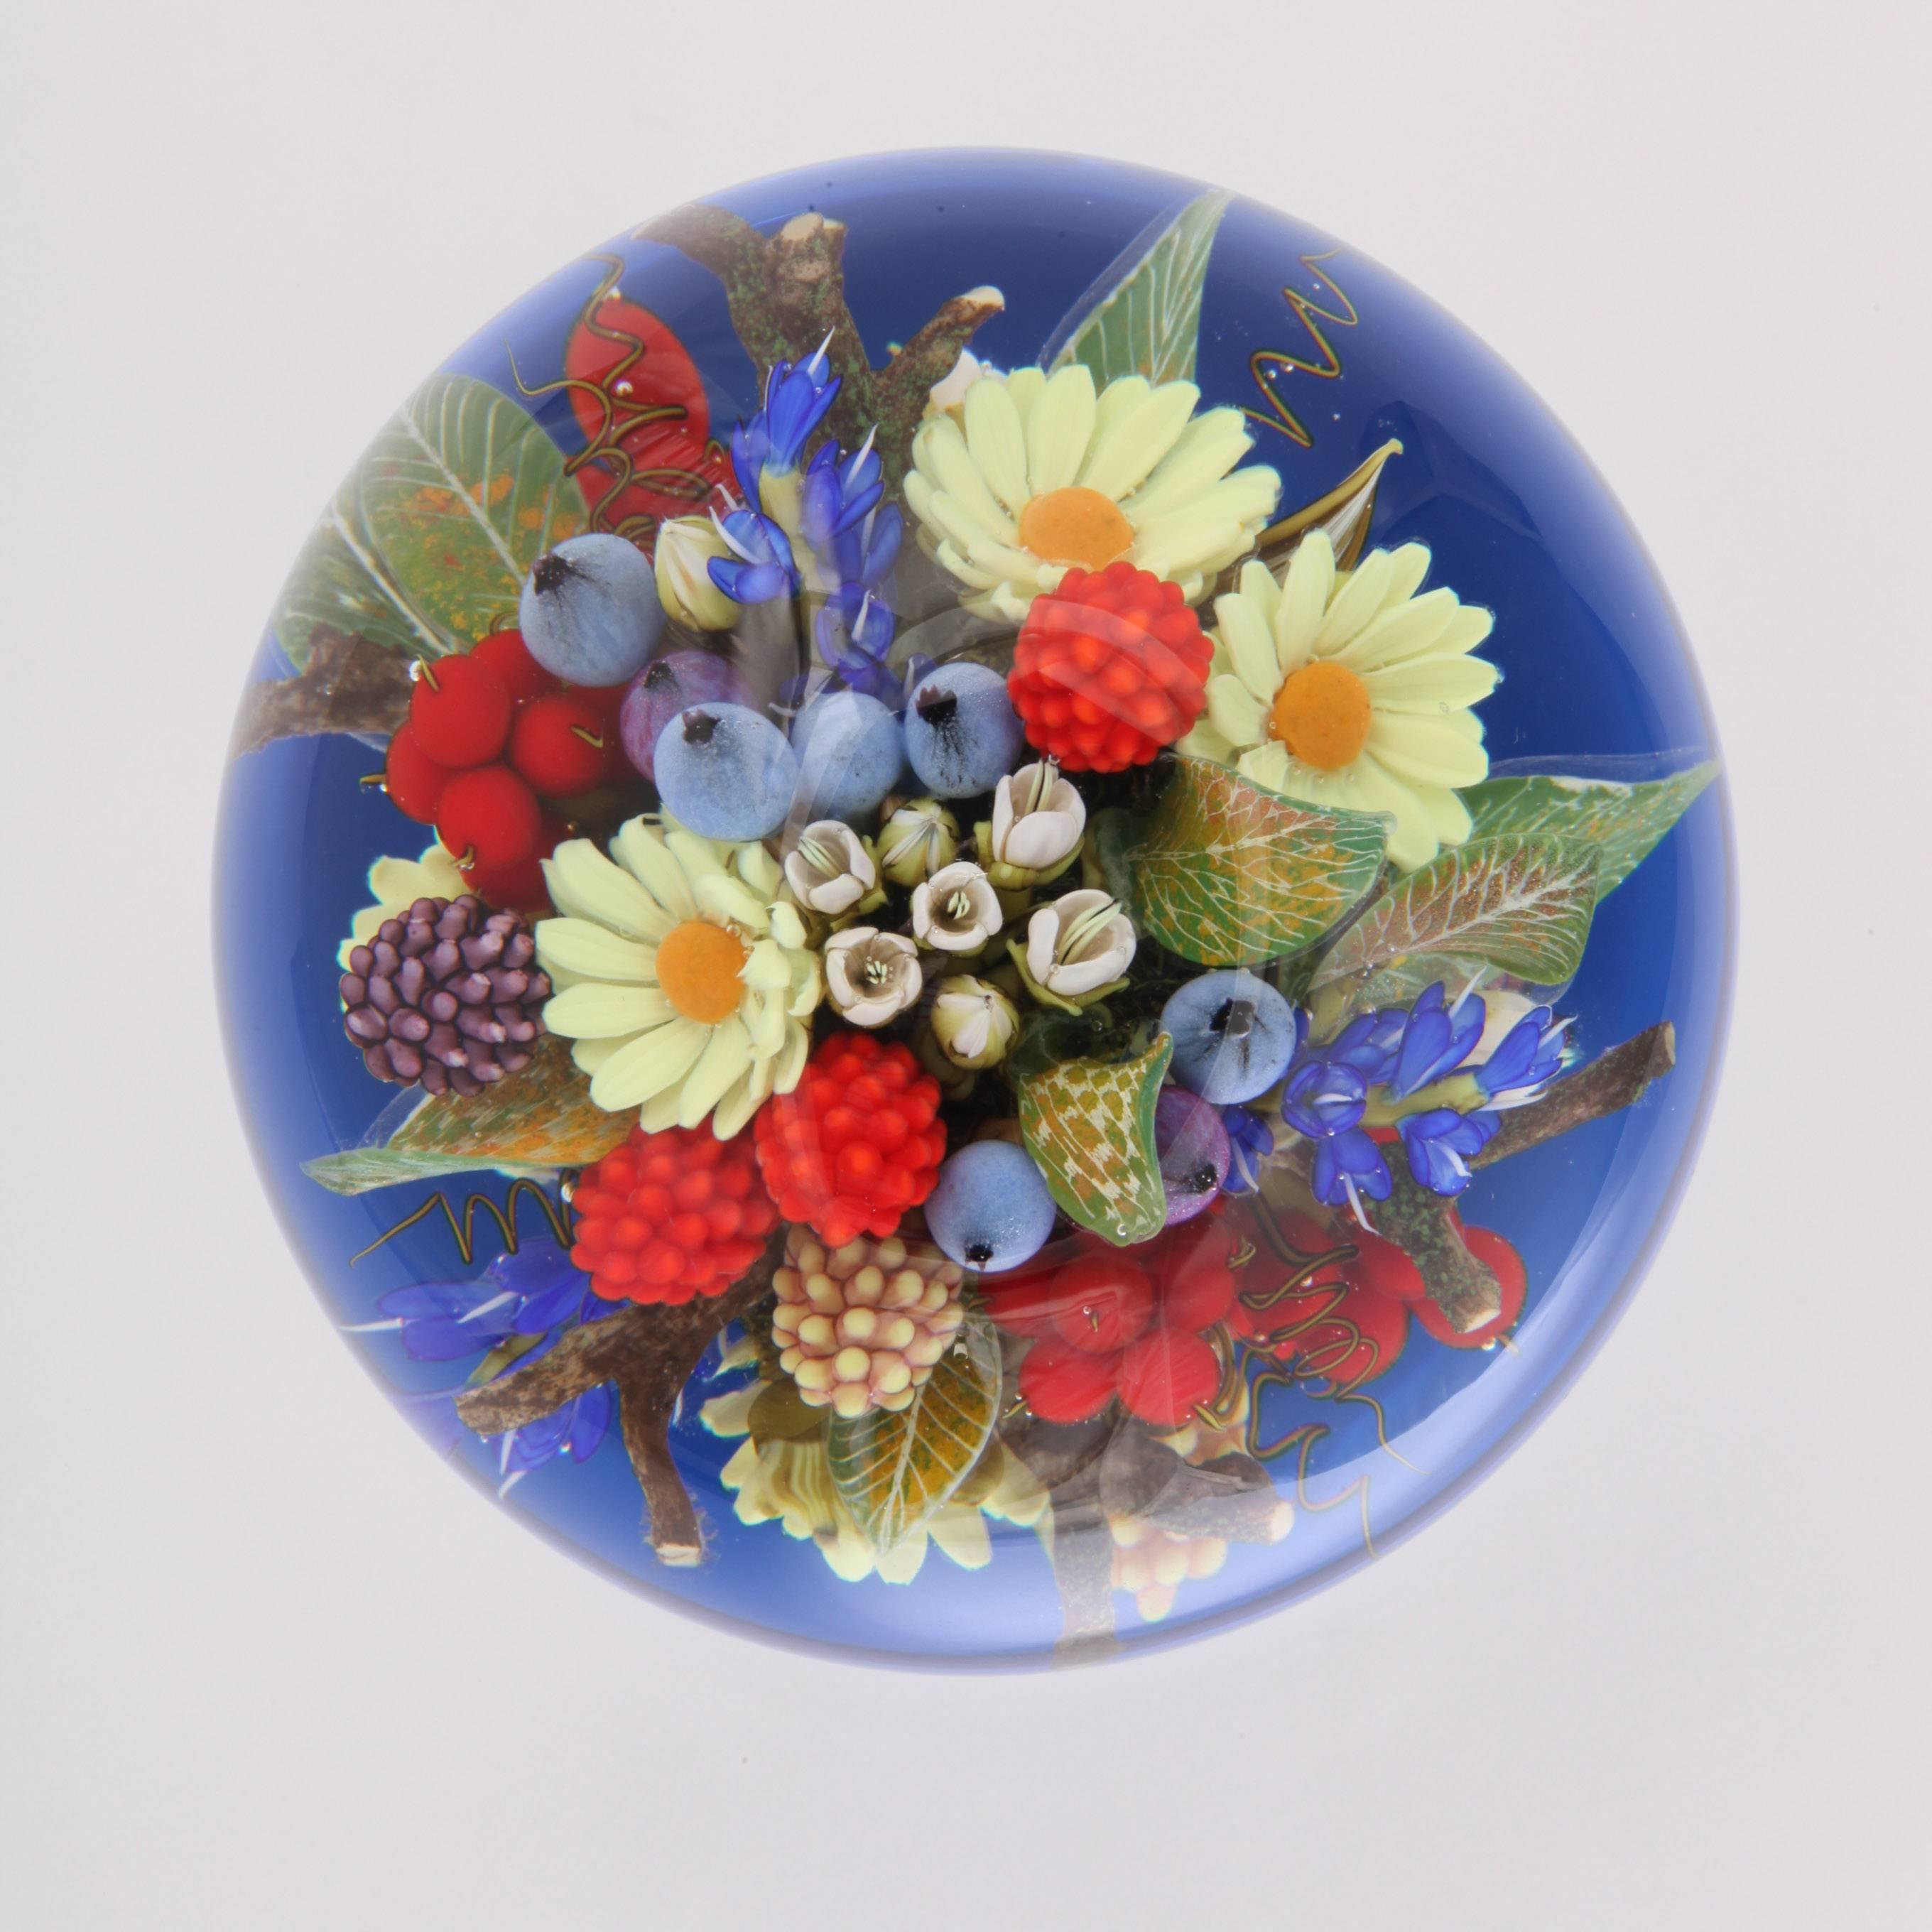 A beautiful David Graeber pedestal paperweight with a compound bouquet of yellow daisies, blue and white flowers and raspberries and blueberries, on a cobalt blue and glass foot.